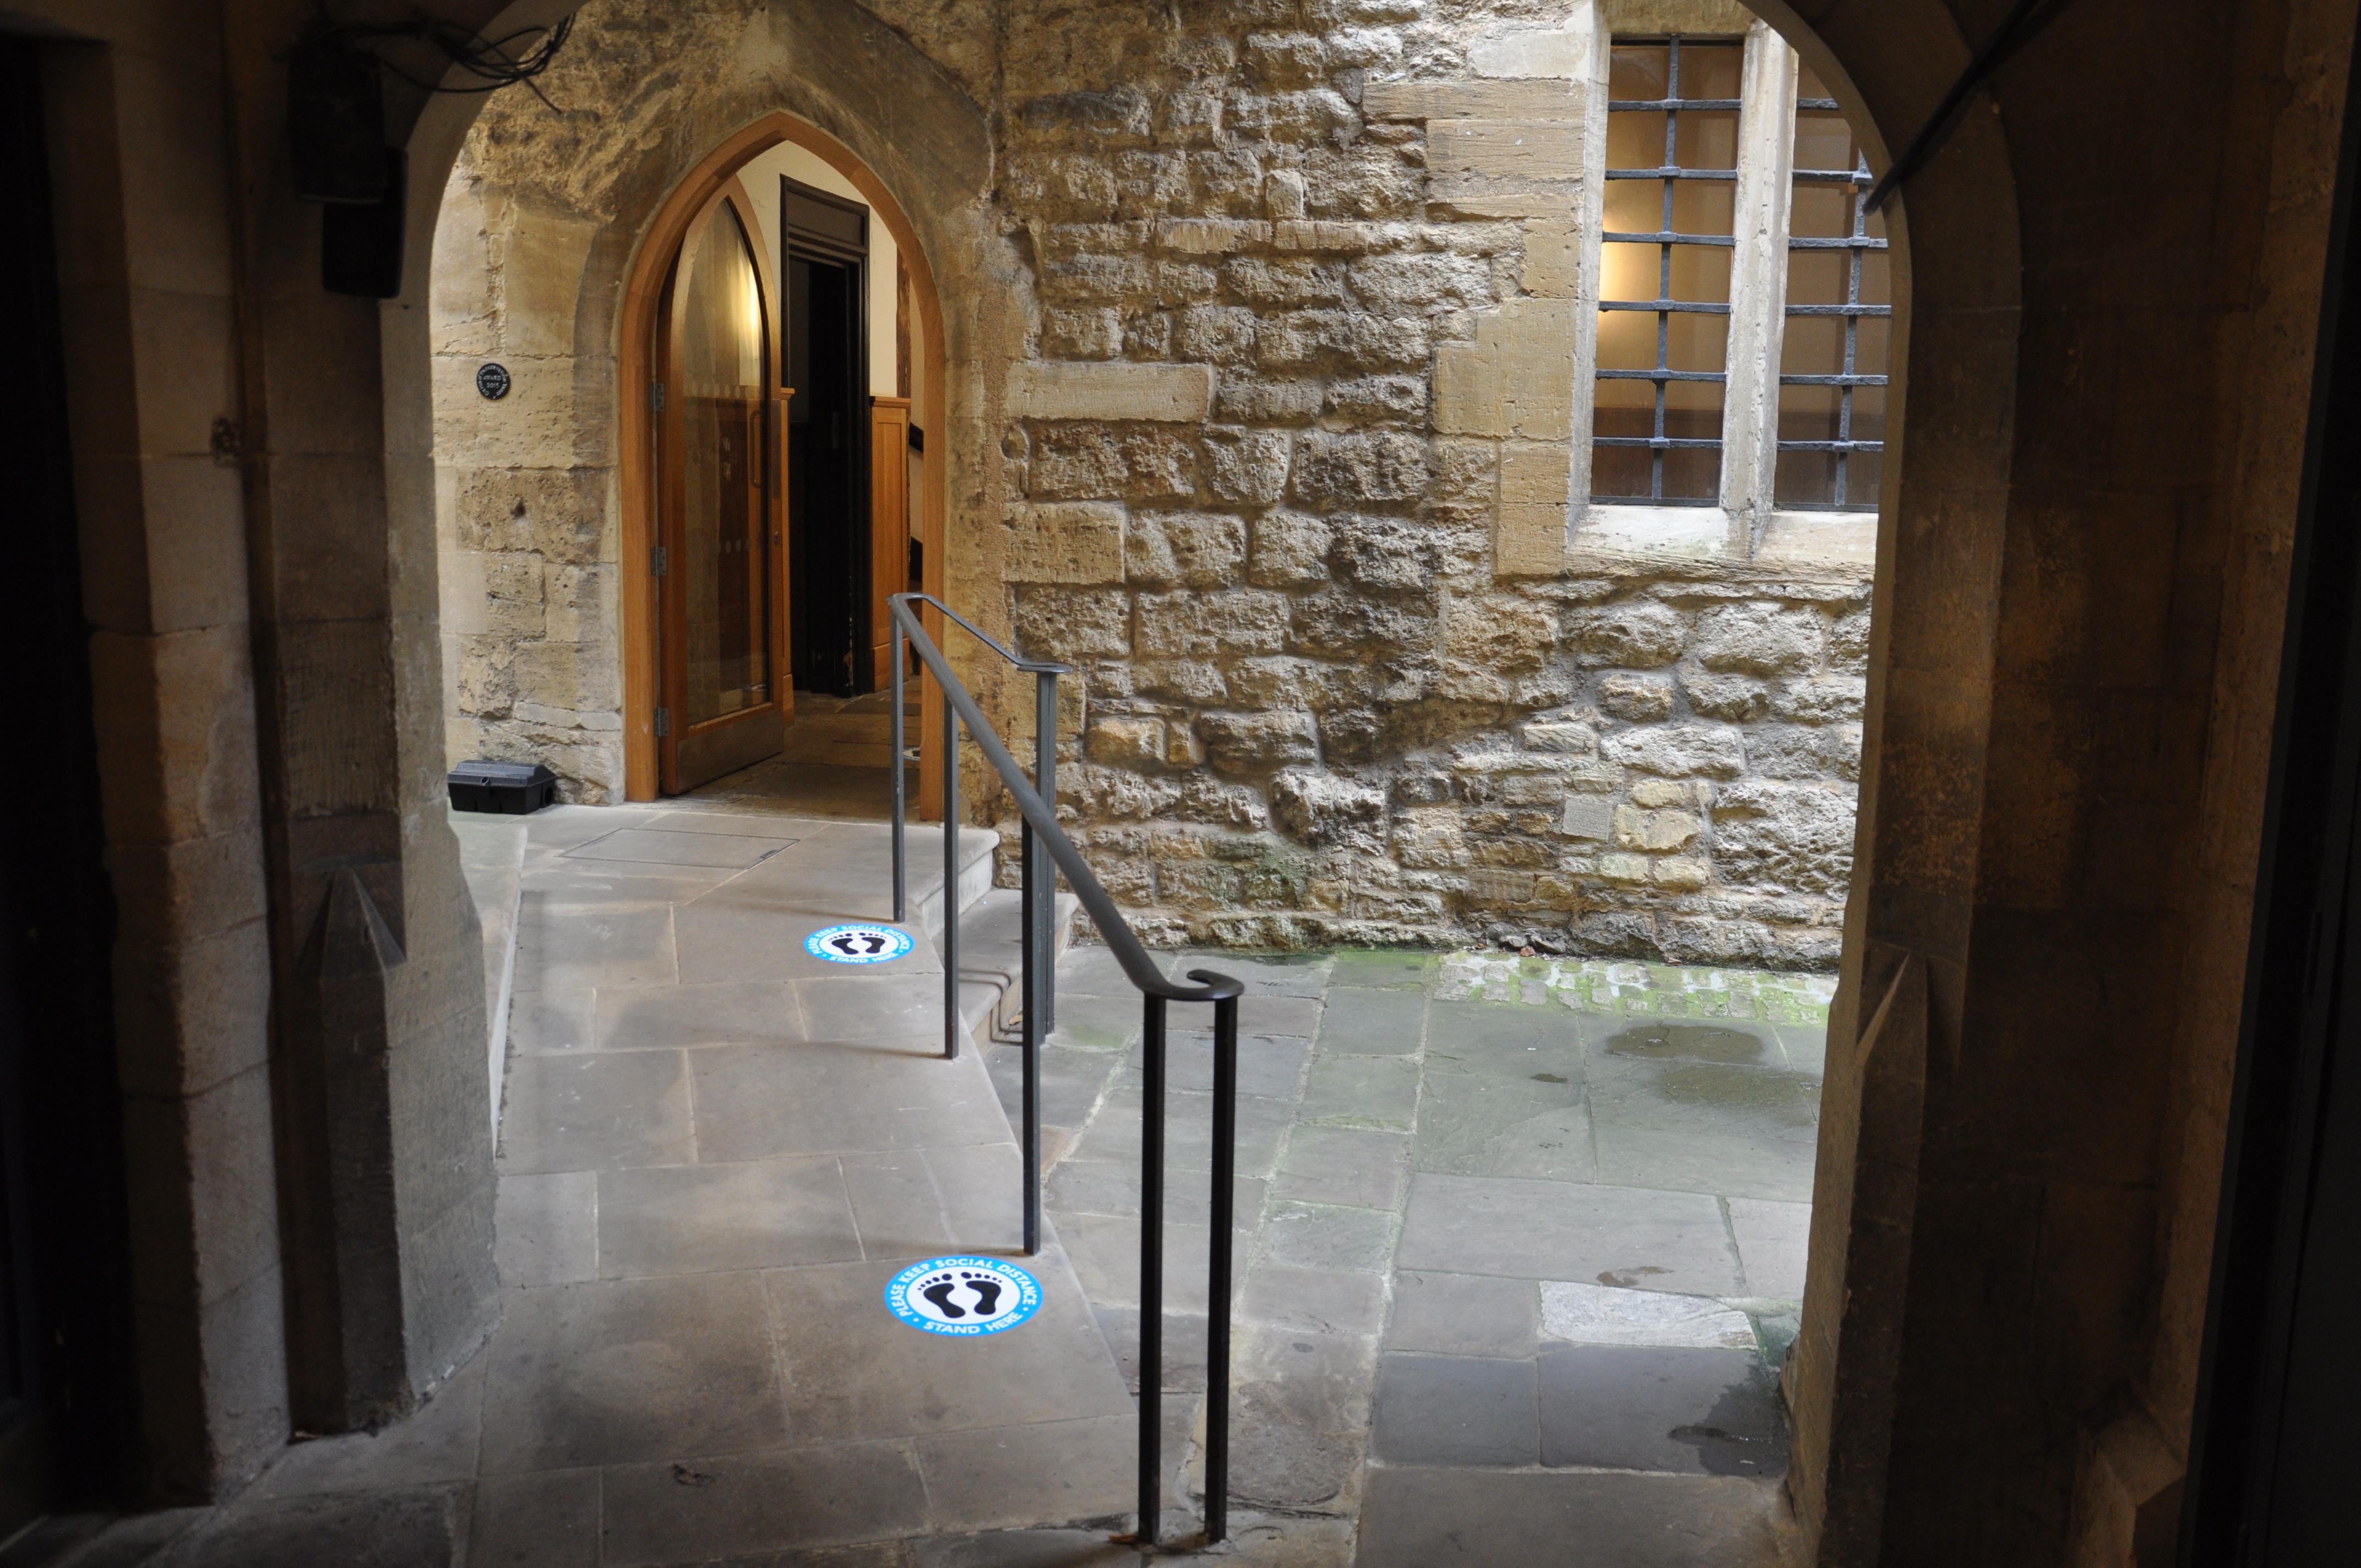 Entrance to Hall with social distancing markers on the floor